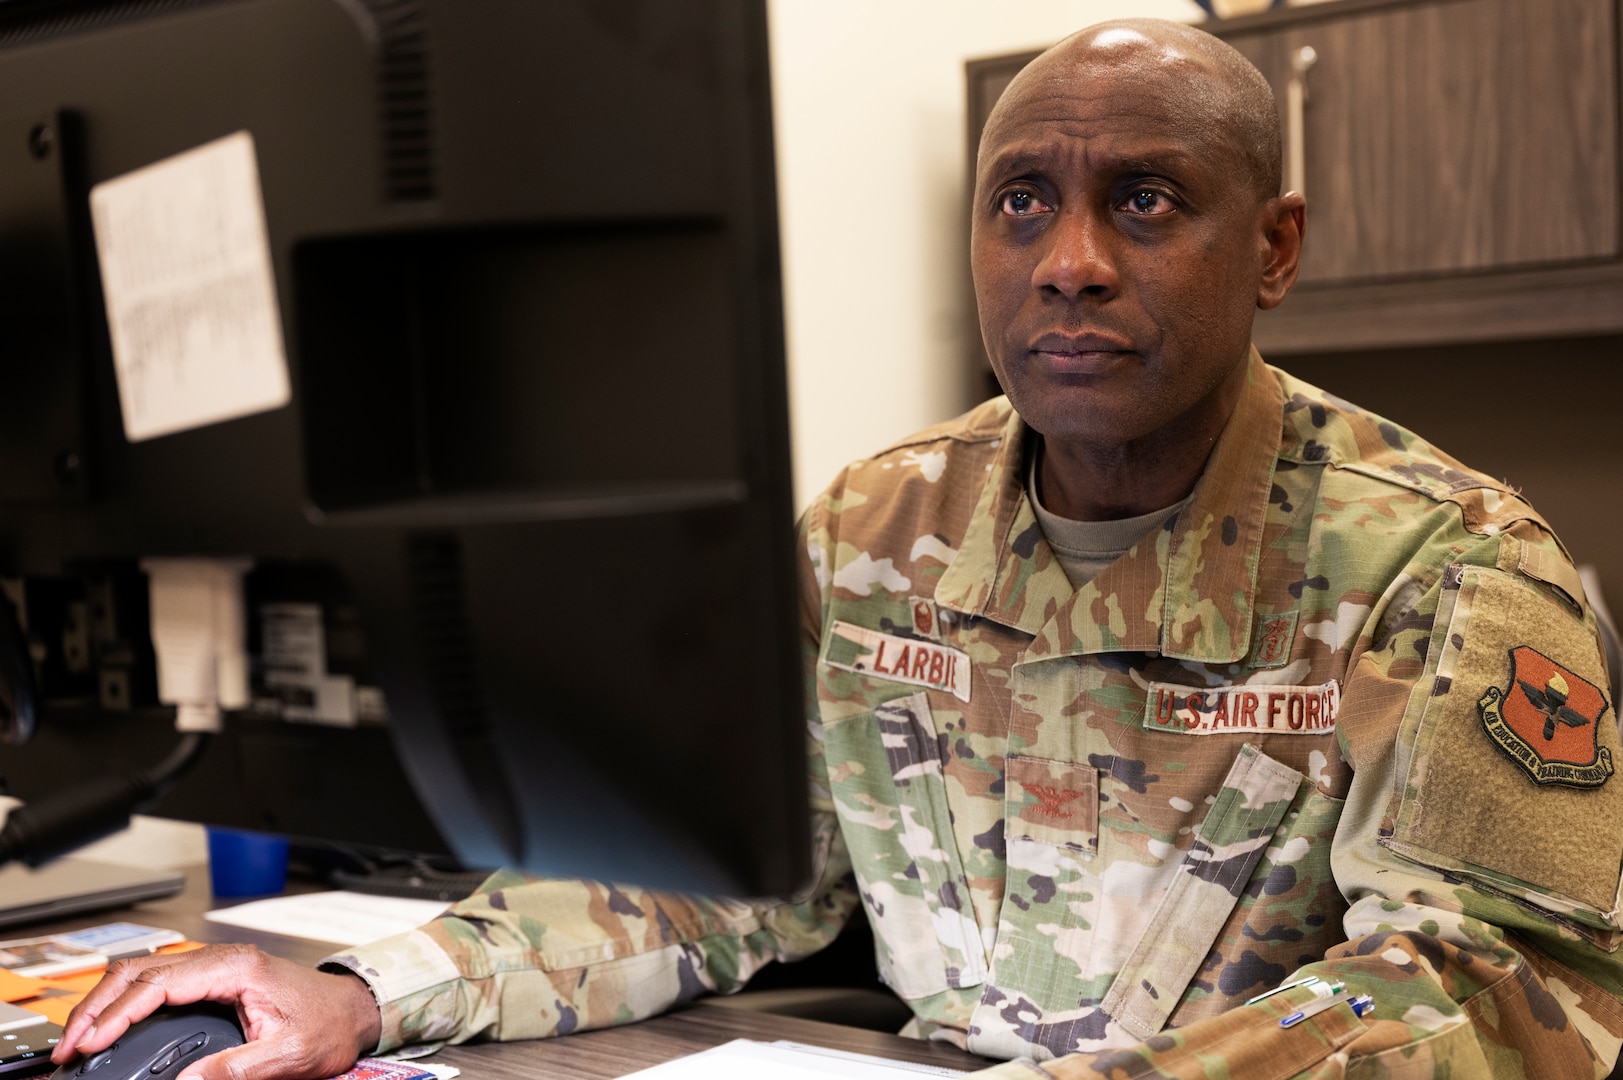 U.S. Air Force Col. Derek Larbie, 17th Medical Group commander, sends an email from his office at the Ross Clinic, Goodfellow Air Force Base, Texas, Feb. 17, 2022. As commander, Larbie oversees the treatment and care of all Goodfellow AFB personnel and their families. (U.S. Air Force photo by, Senior Airman Michael Bowman)